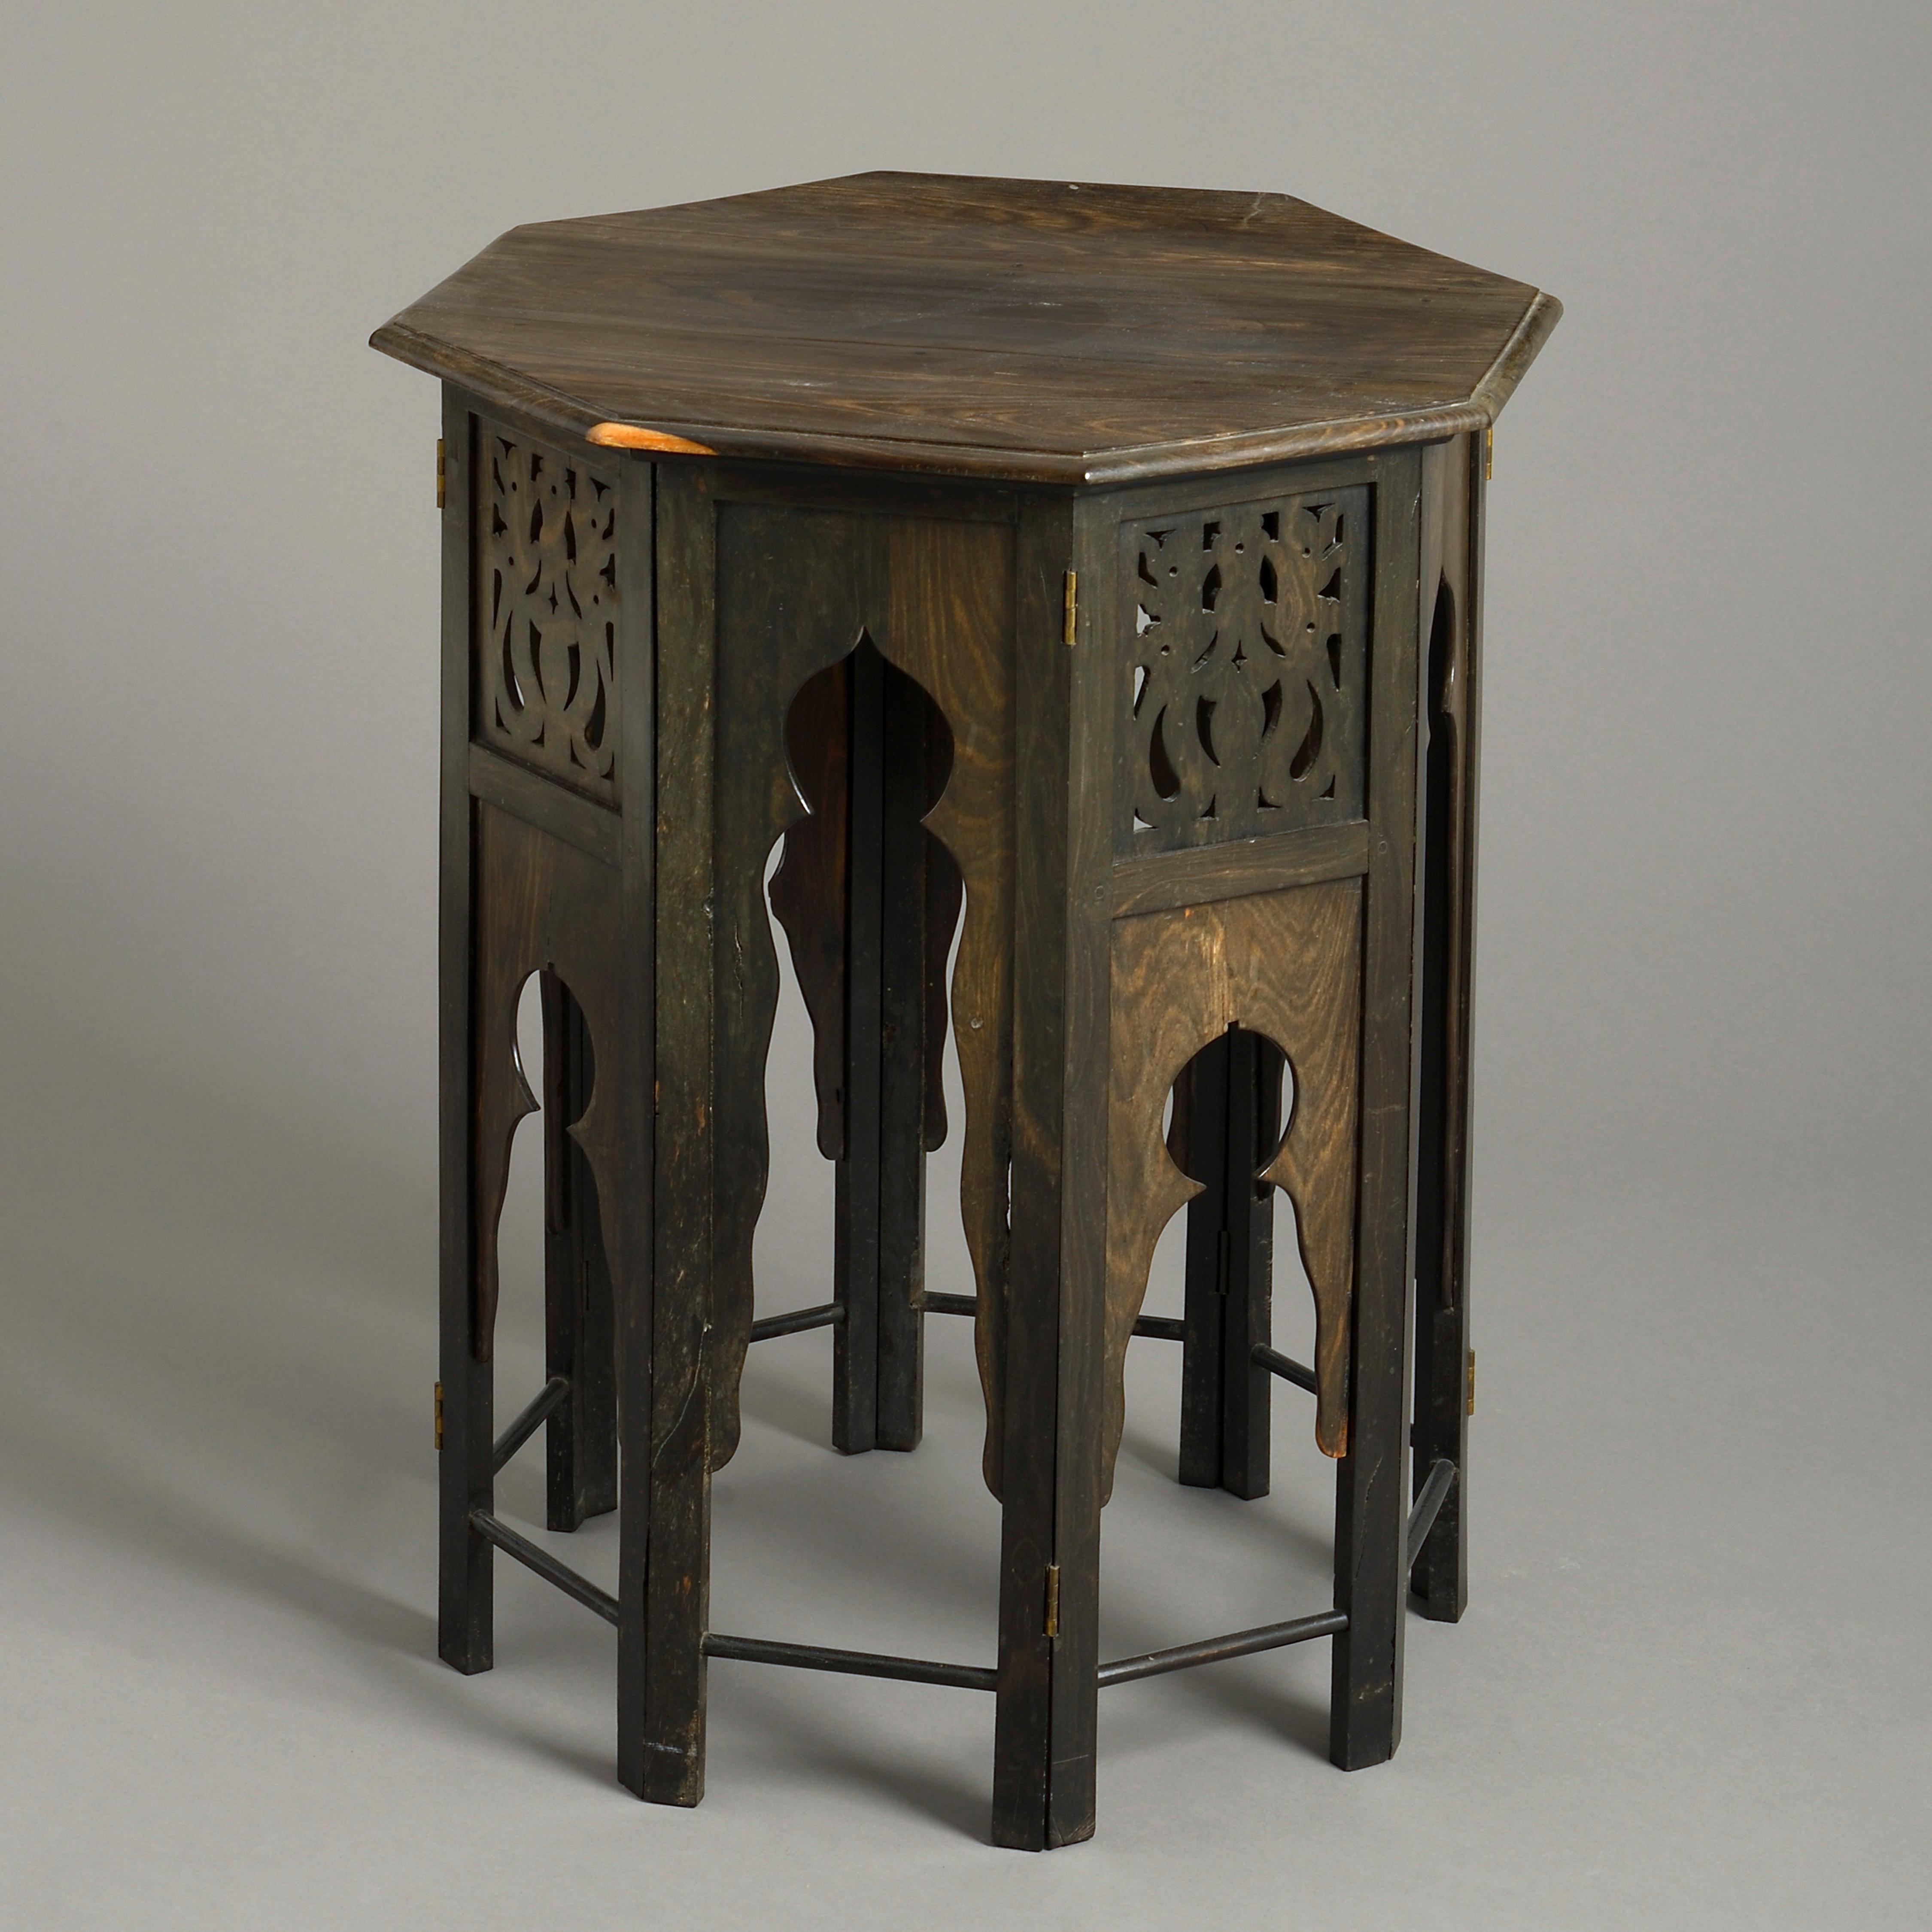 A fine pair of Anglo-Indian octagonal ebony lamp tables, circa 1900.